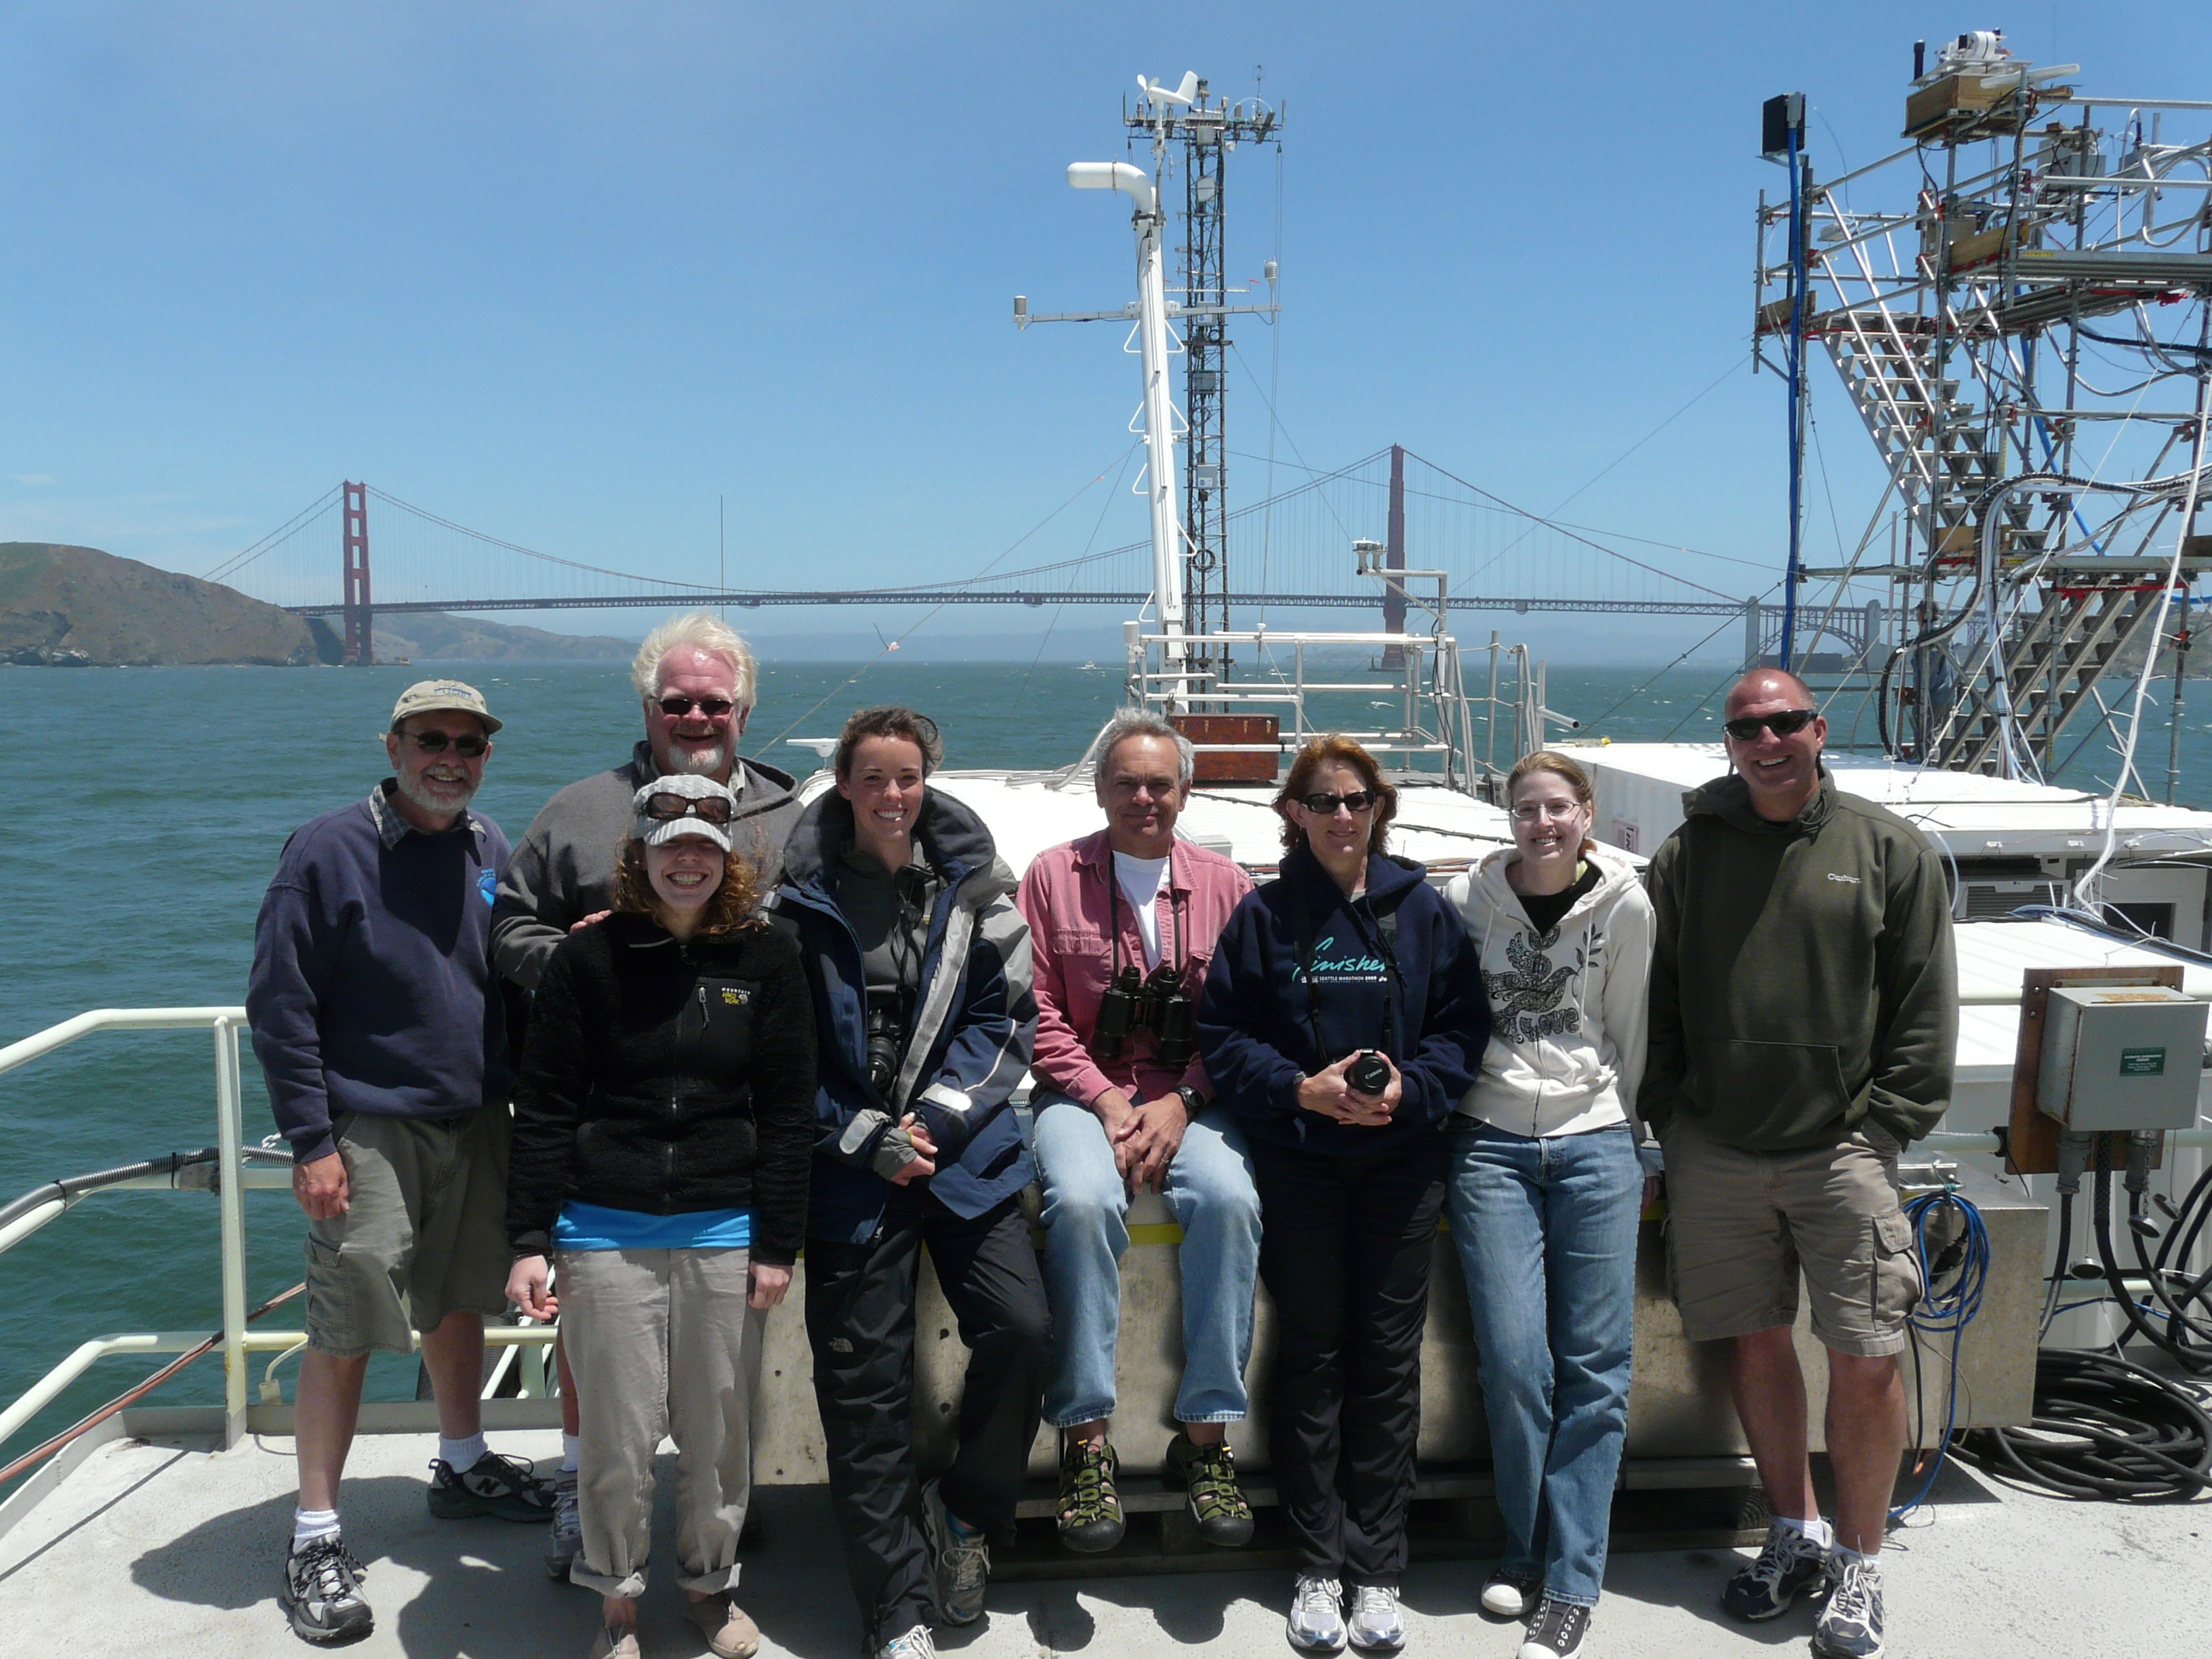 Onboard the R/V Atlantis: Chief Scientist Dr. Timothy Bates (fourth from the right), Dr. Patricia Quinn (third from the right), and Mr. Drew Hamilton (second from the left)